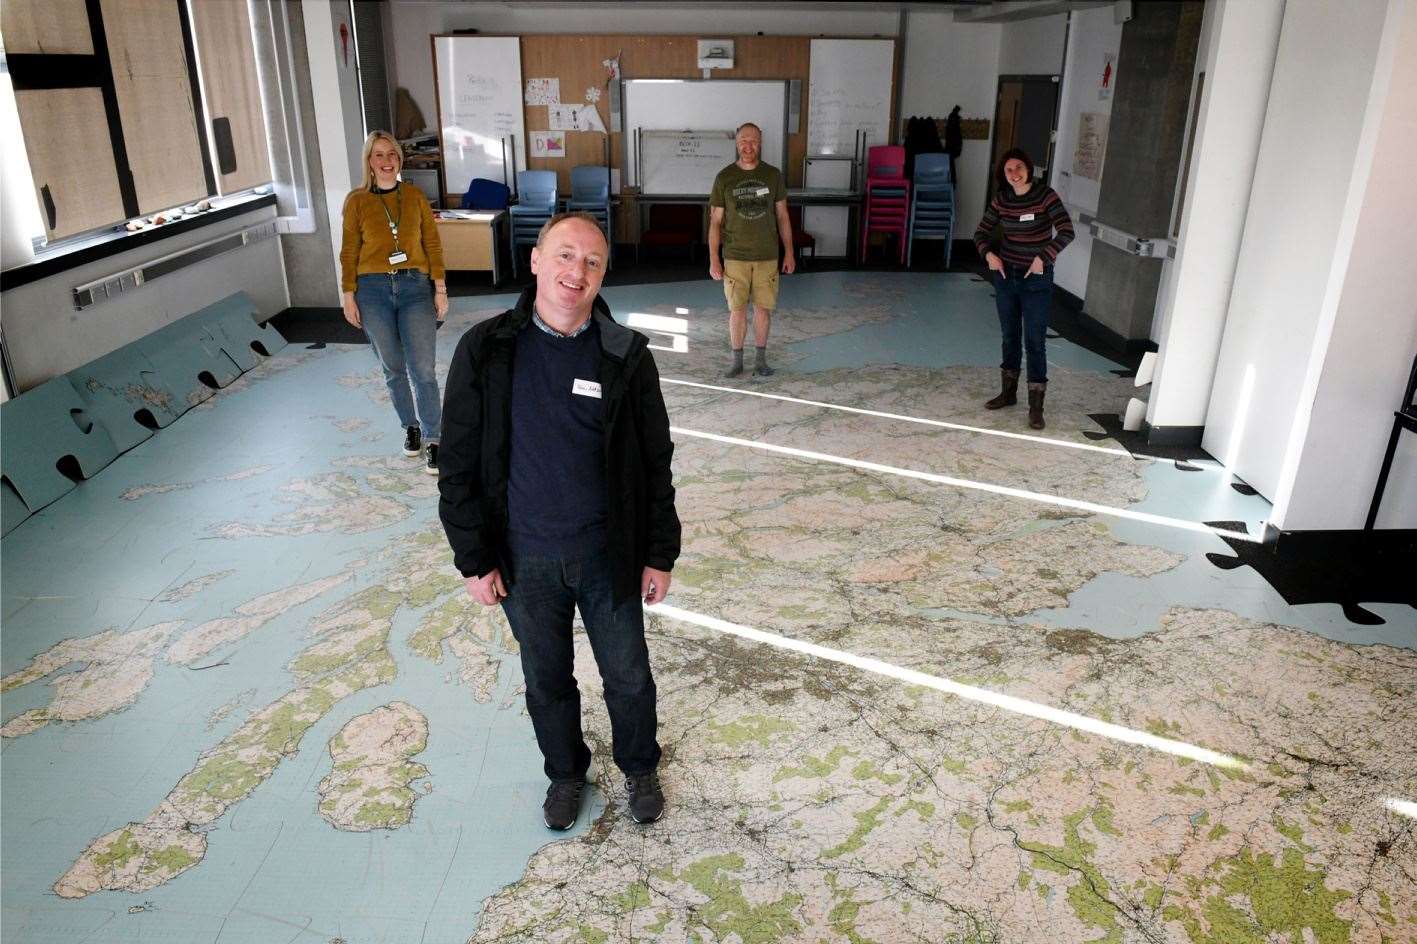 Teachers standing on their home towns on the giant jigsaw OS map of Scotland – Shetland was out in the corridor.